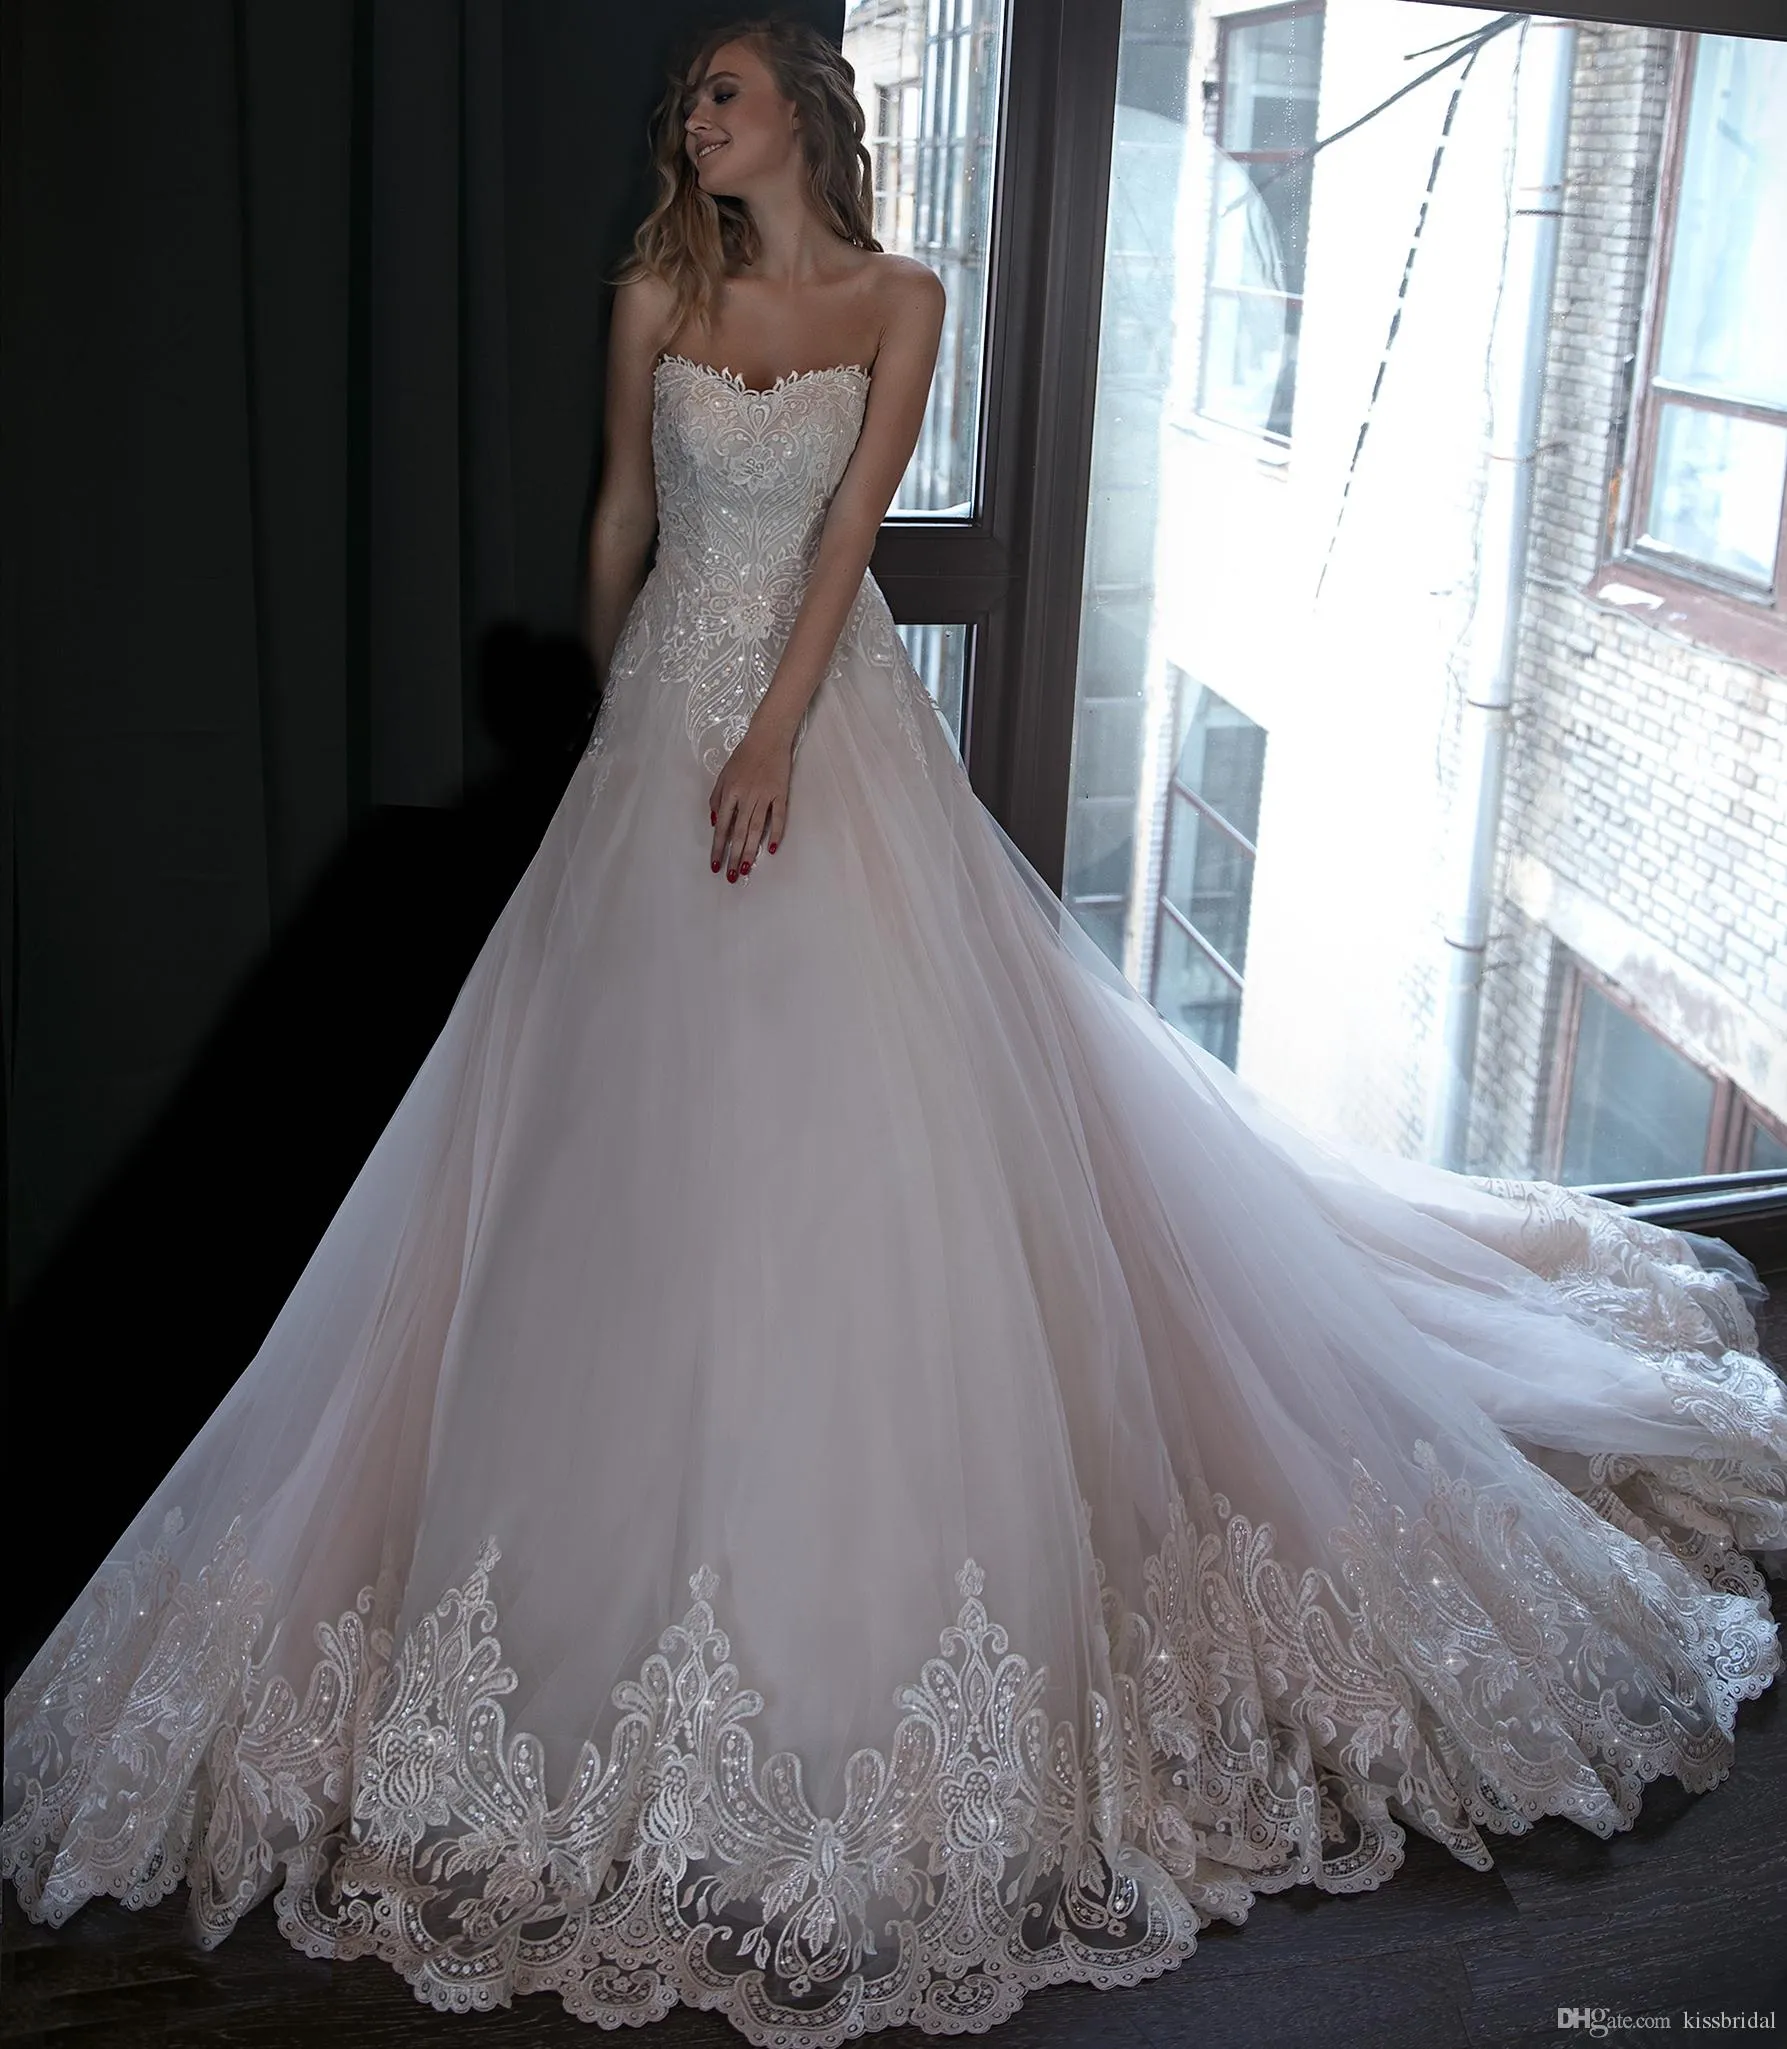 A-line Sexy Strapless Dresses Sleeveless Bead Lace Tulle Wedding Dress Bridal Gowns Long Train Bride Formal Gown Robe De Mariee